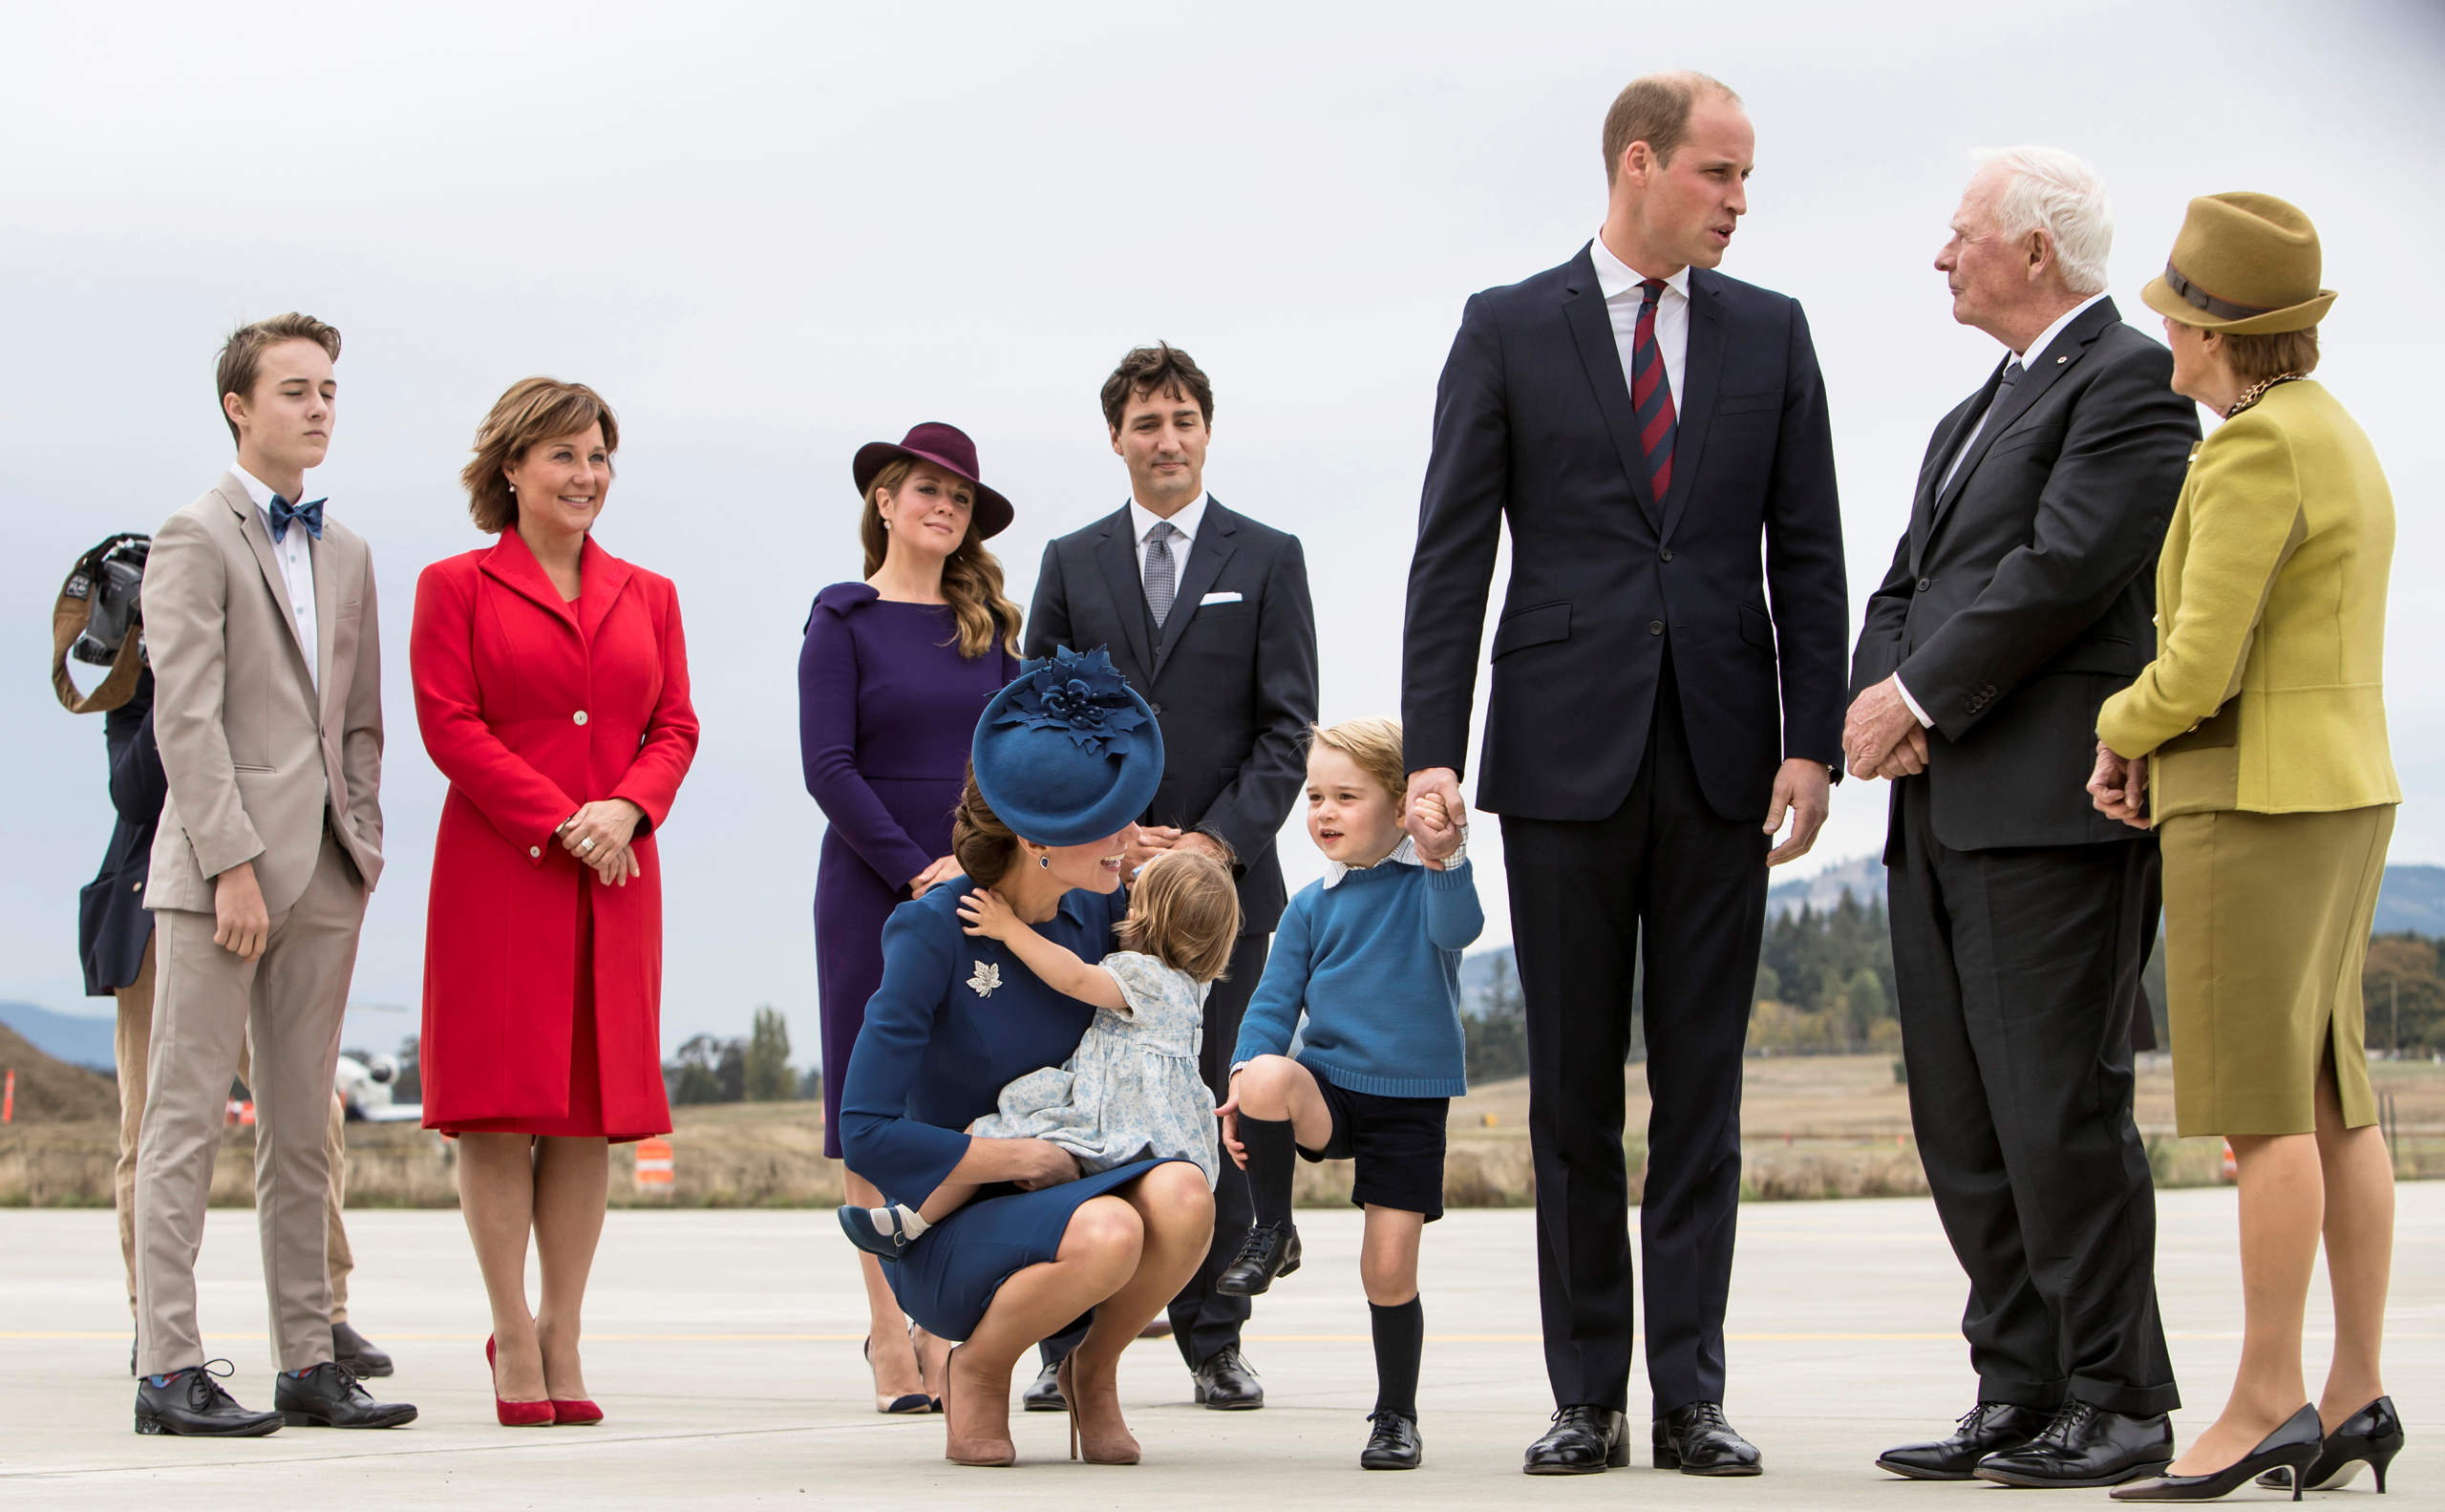 Britain's Prince William, Catherine, Duchess of Cambridge, Prince George and Princess Charlotte arrive at the Victoria International Airport for the start of their eight day royal tour to Canada in Victoria, British Columbia on September 24, 2016. Also pictured, in the rear, are Canada's Prime Minister Justin Trudeau and his wife Sophie Gregoire Trudeau. (Kevin Light—Reuters)